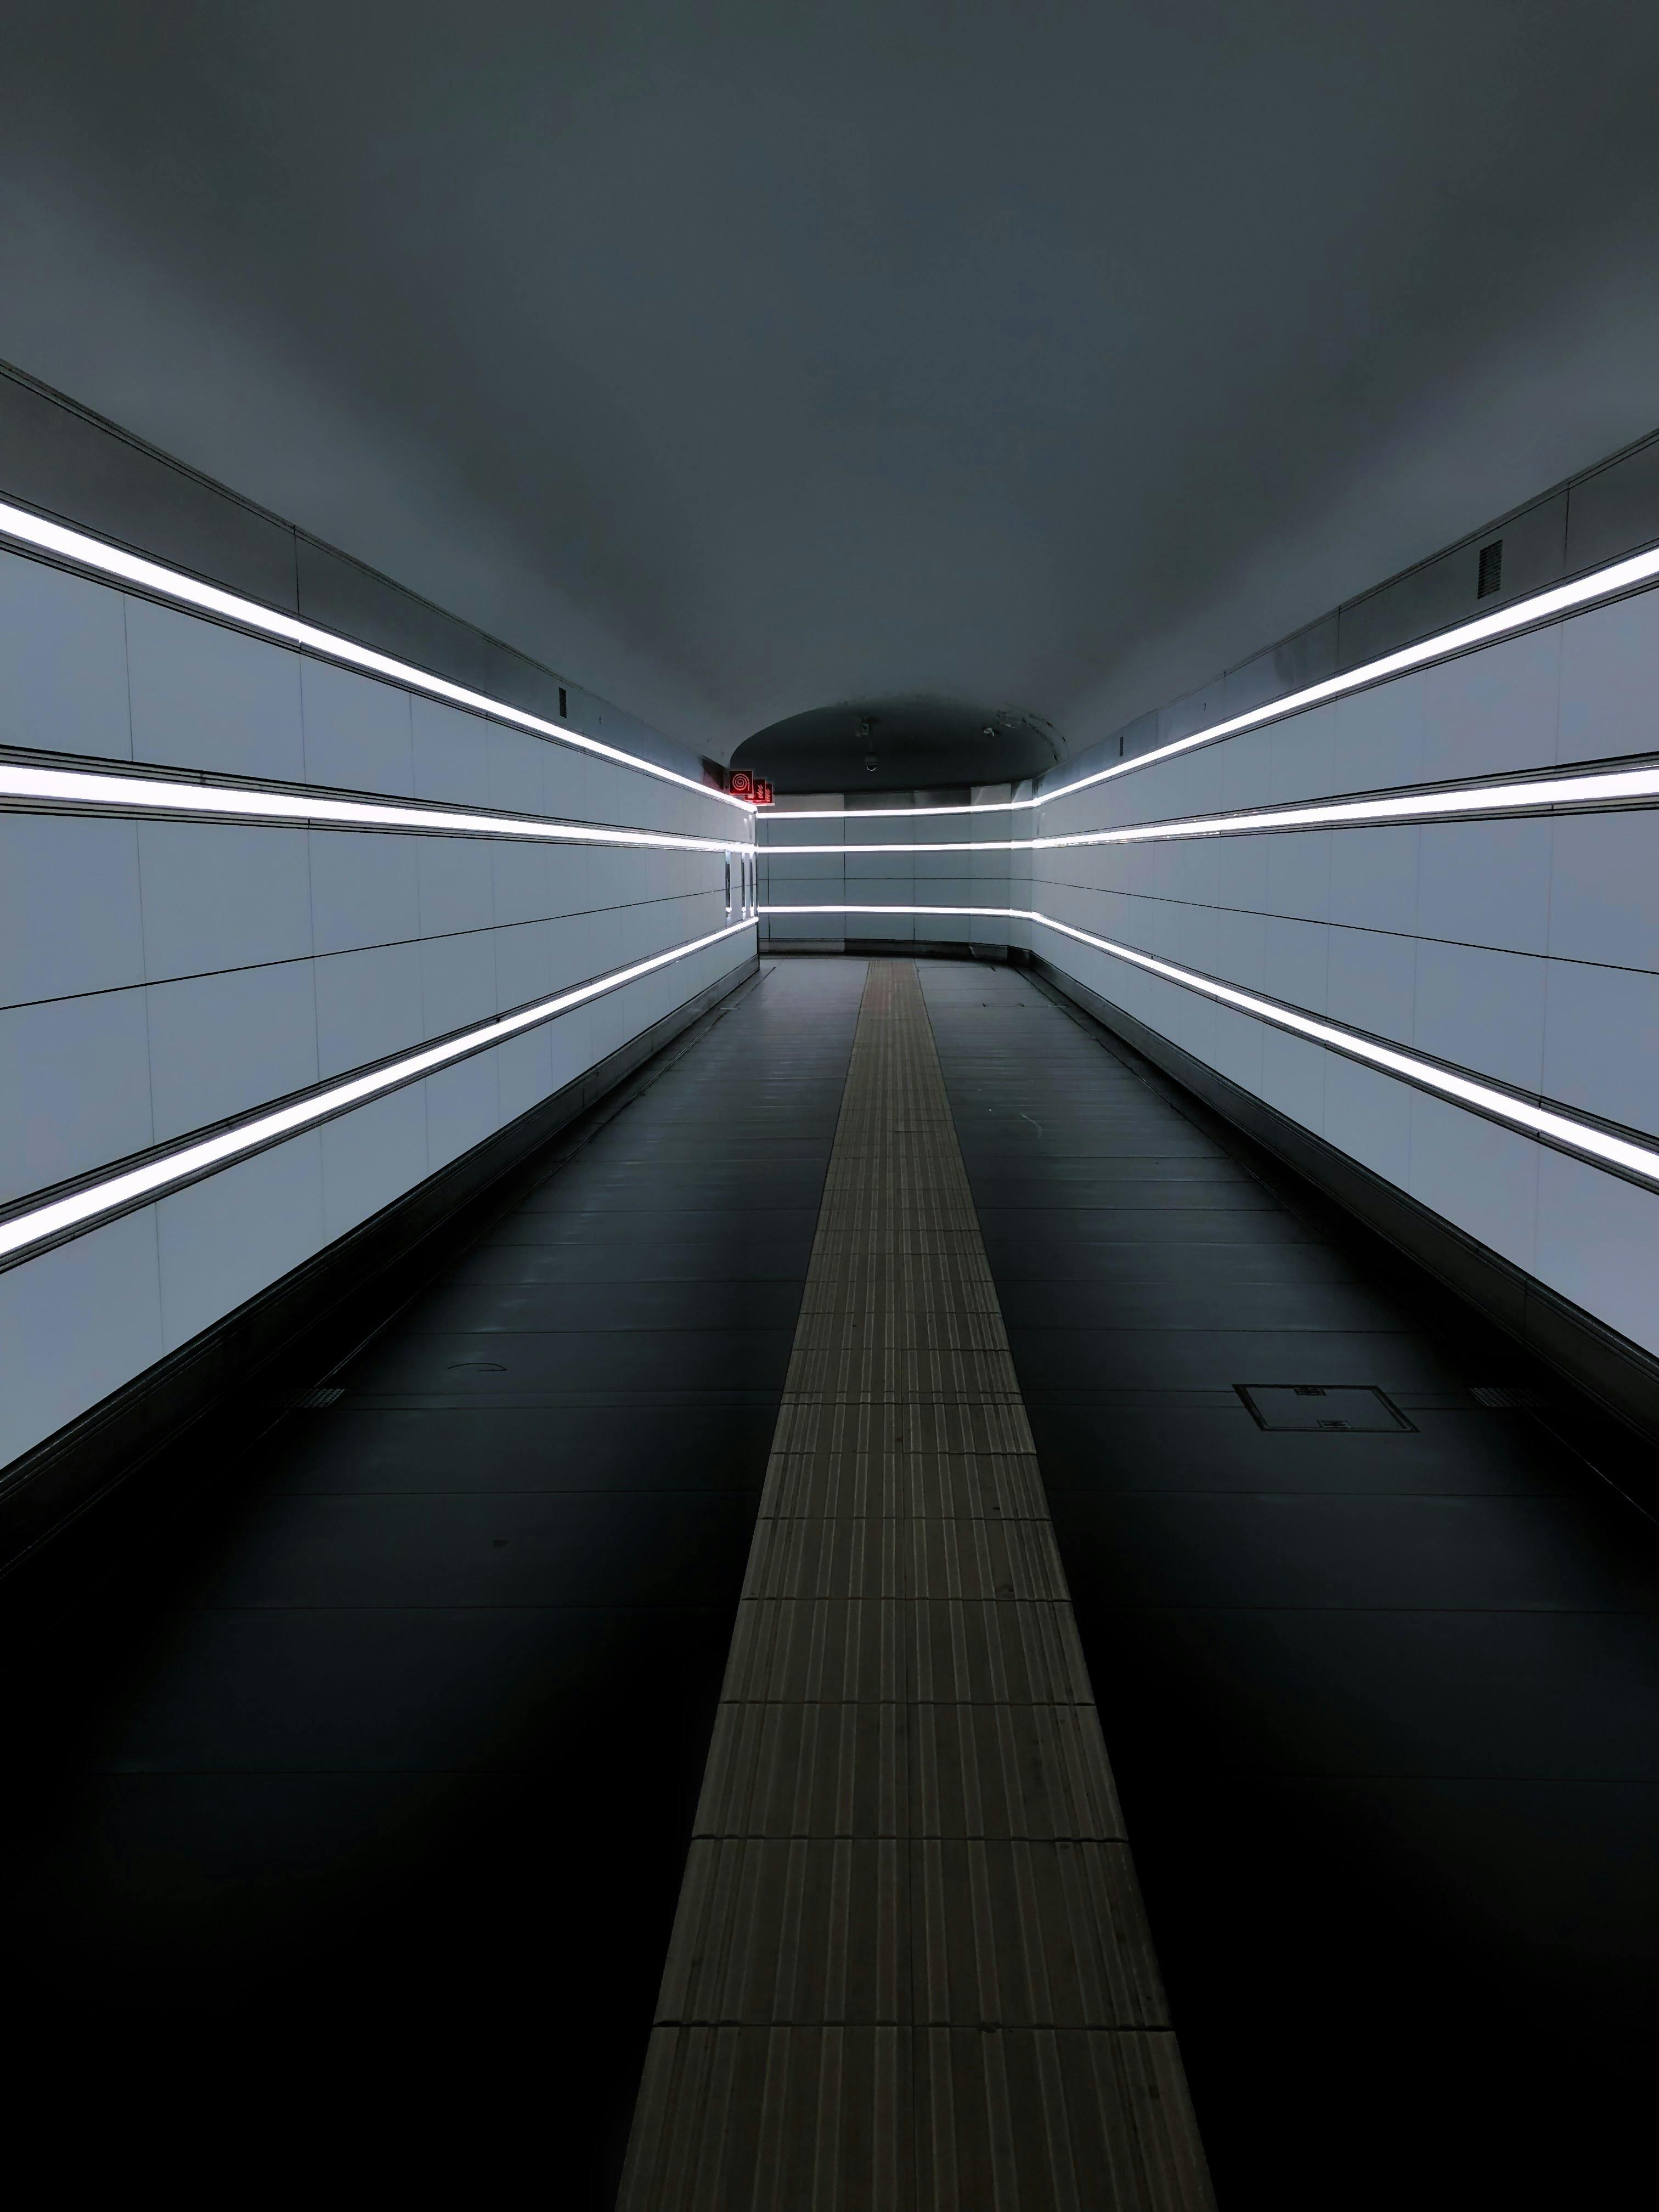 Free stock photo of #neon #black #grey #tunnel #architecture #station